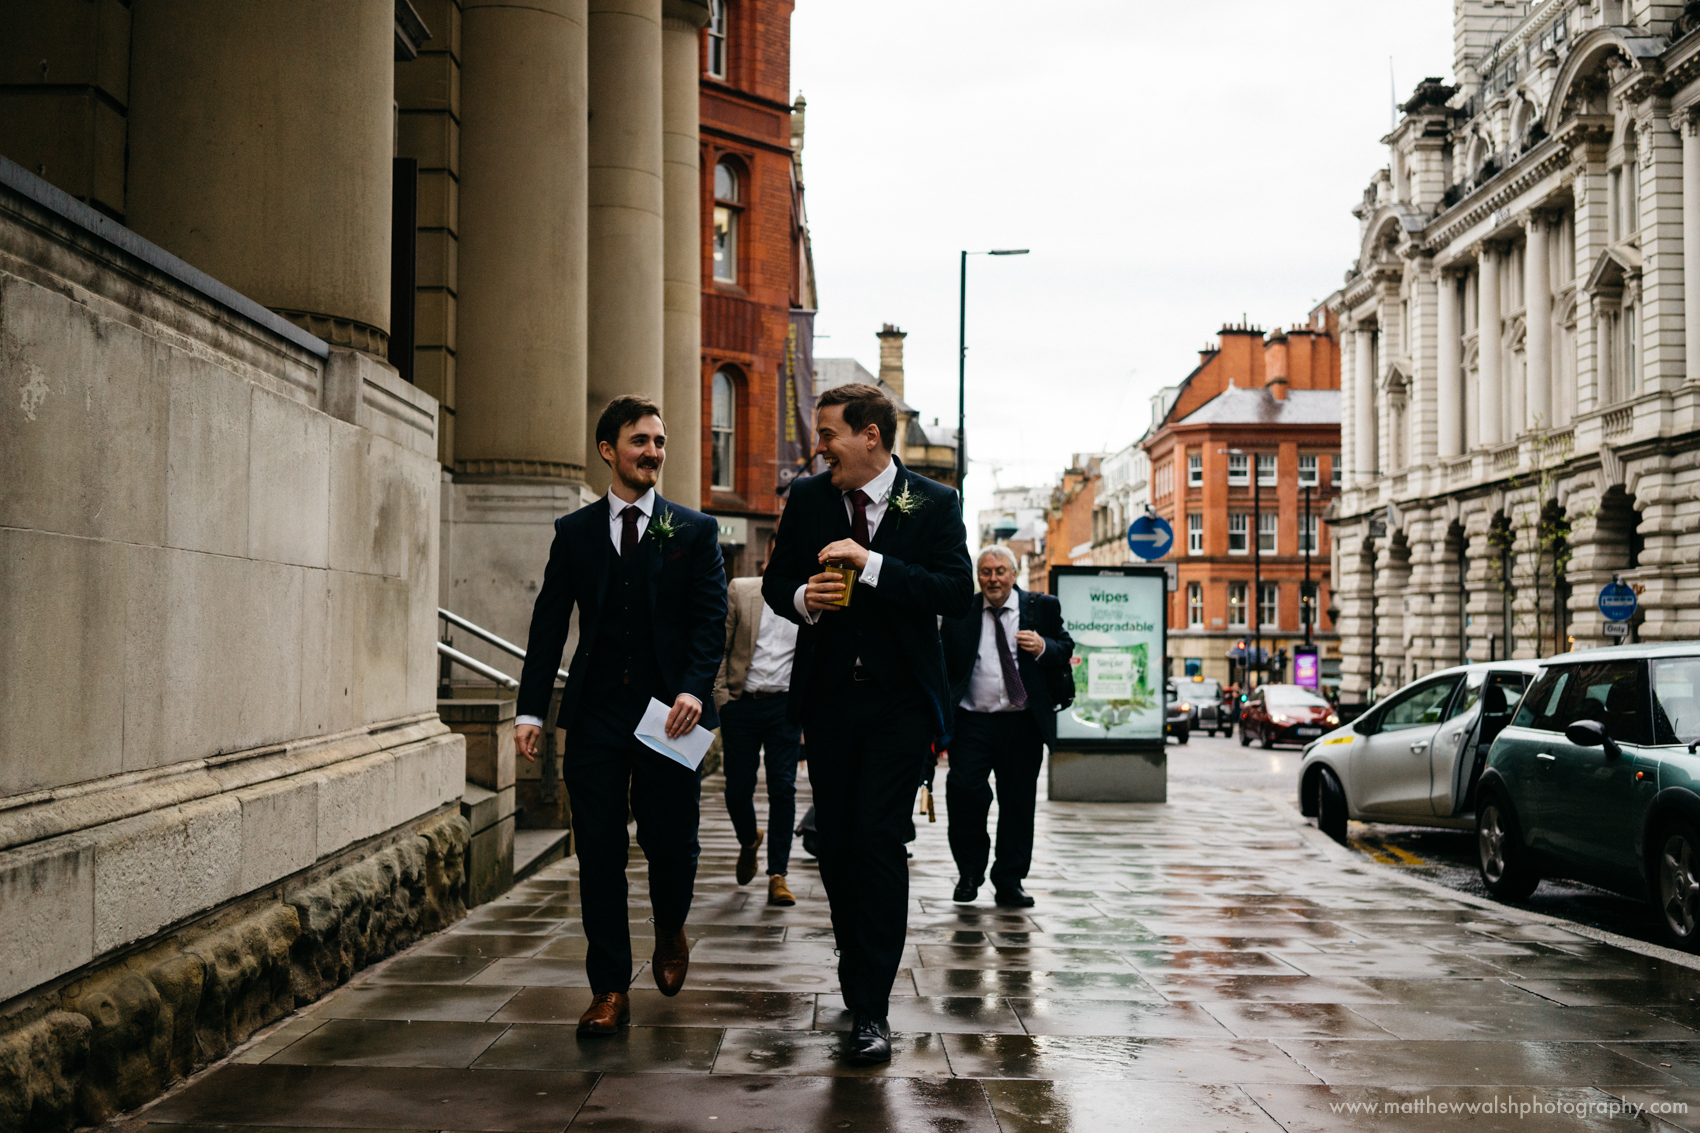 The best man and groom share a wee tipple from a hip flask on their walk from the ceremony  to the bar and restaurant